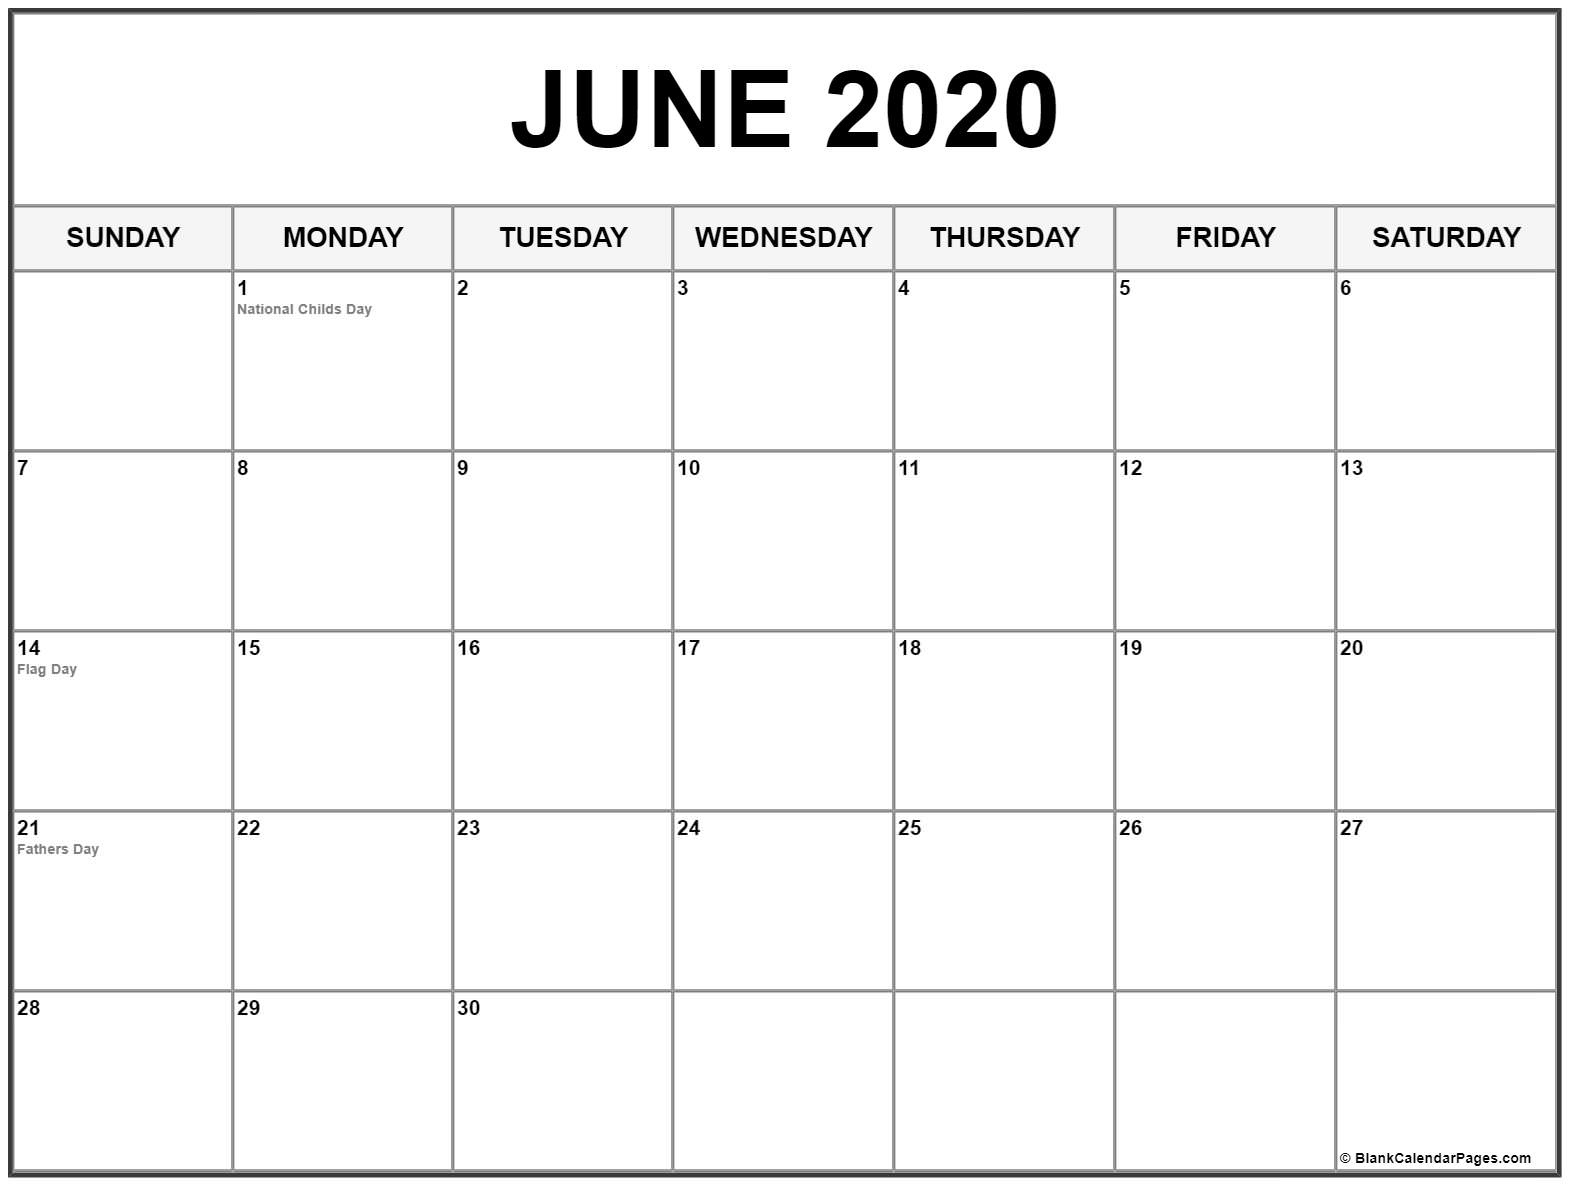 Collection Of June 2020 Calendars With Holidays